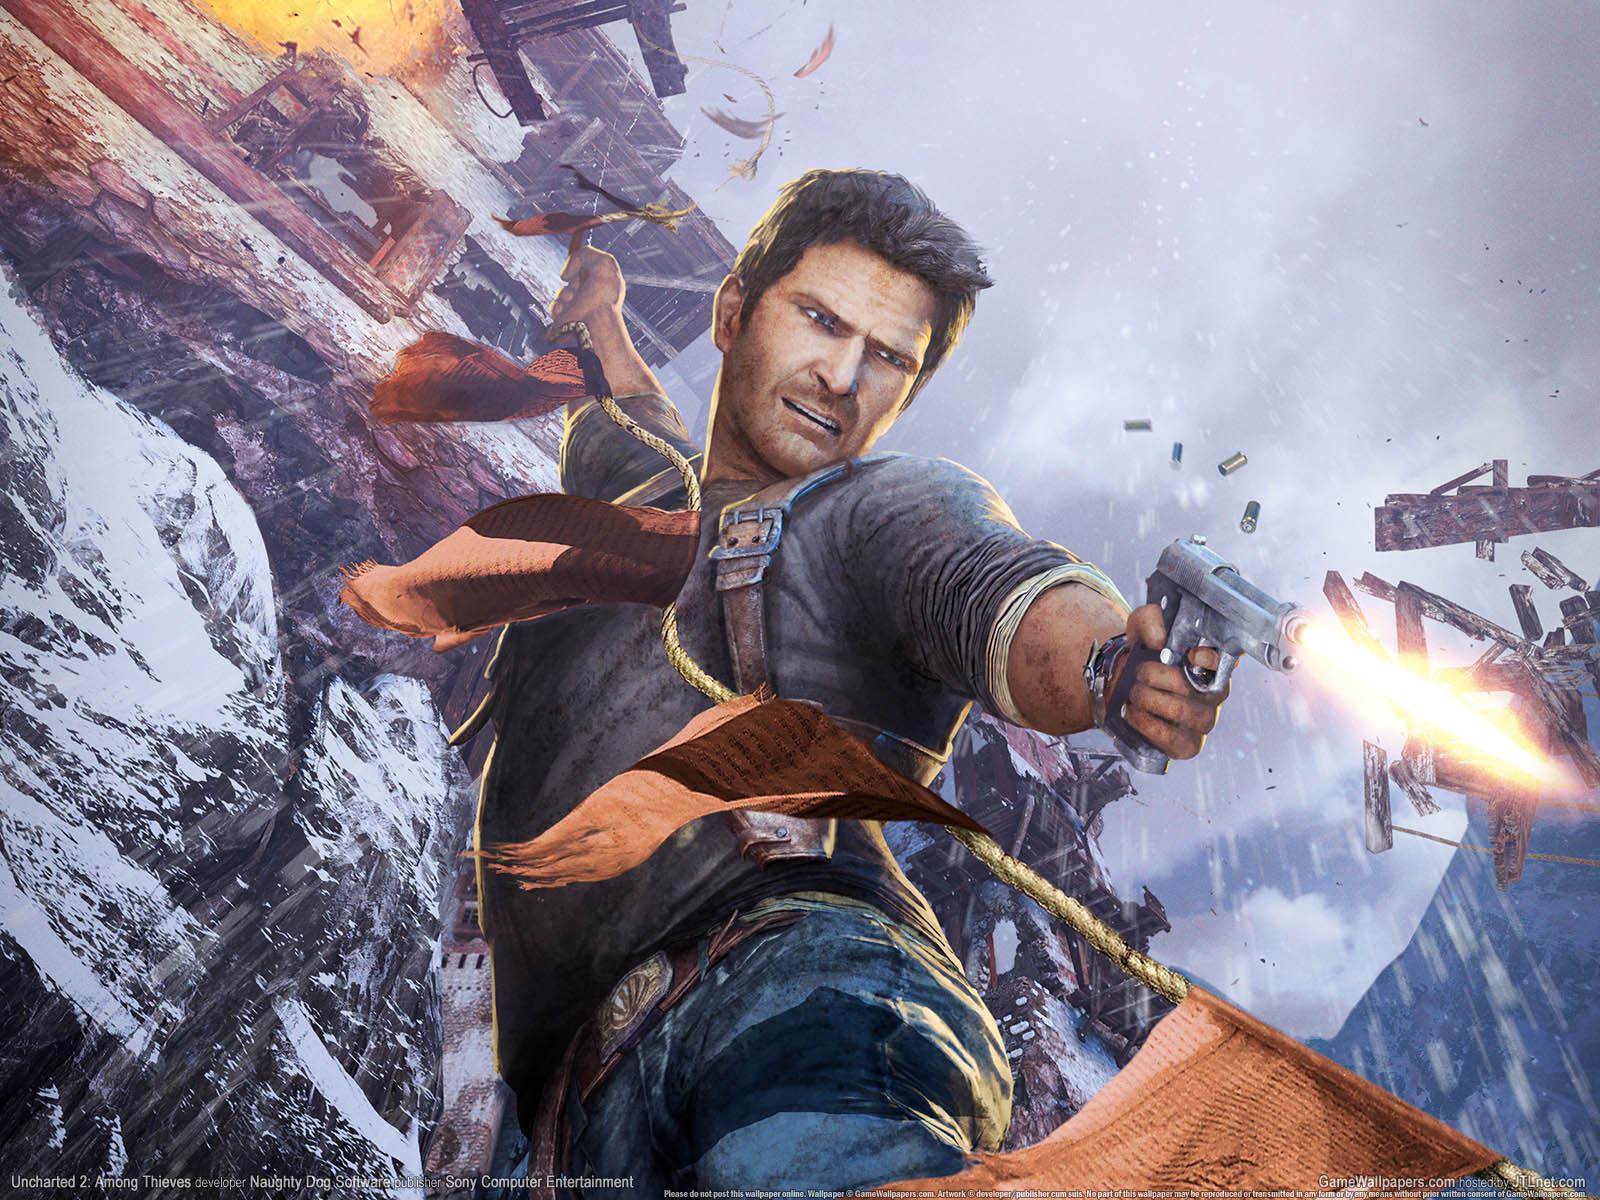 Uncharted 2: Among Thieves fond d'cran 04 1600x1200